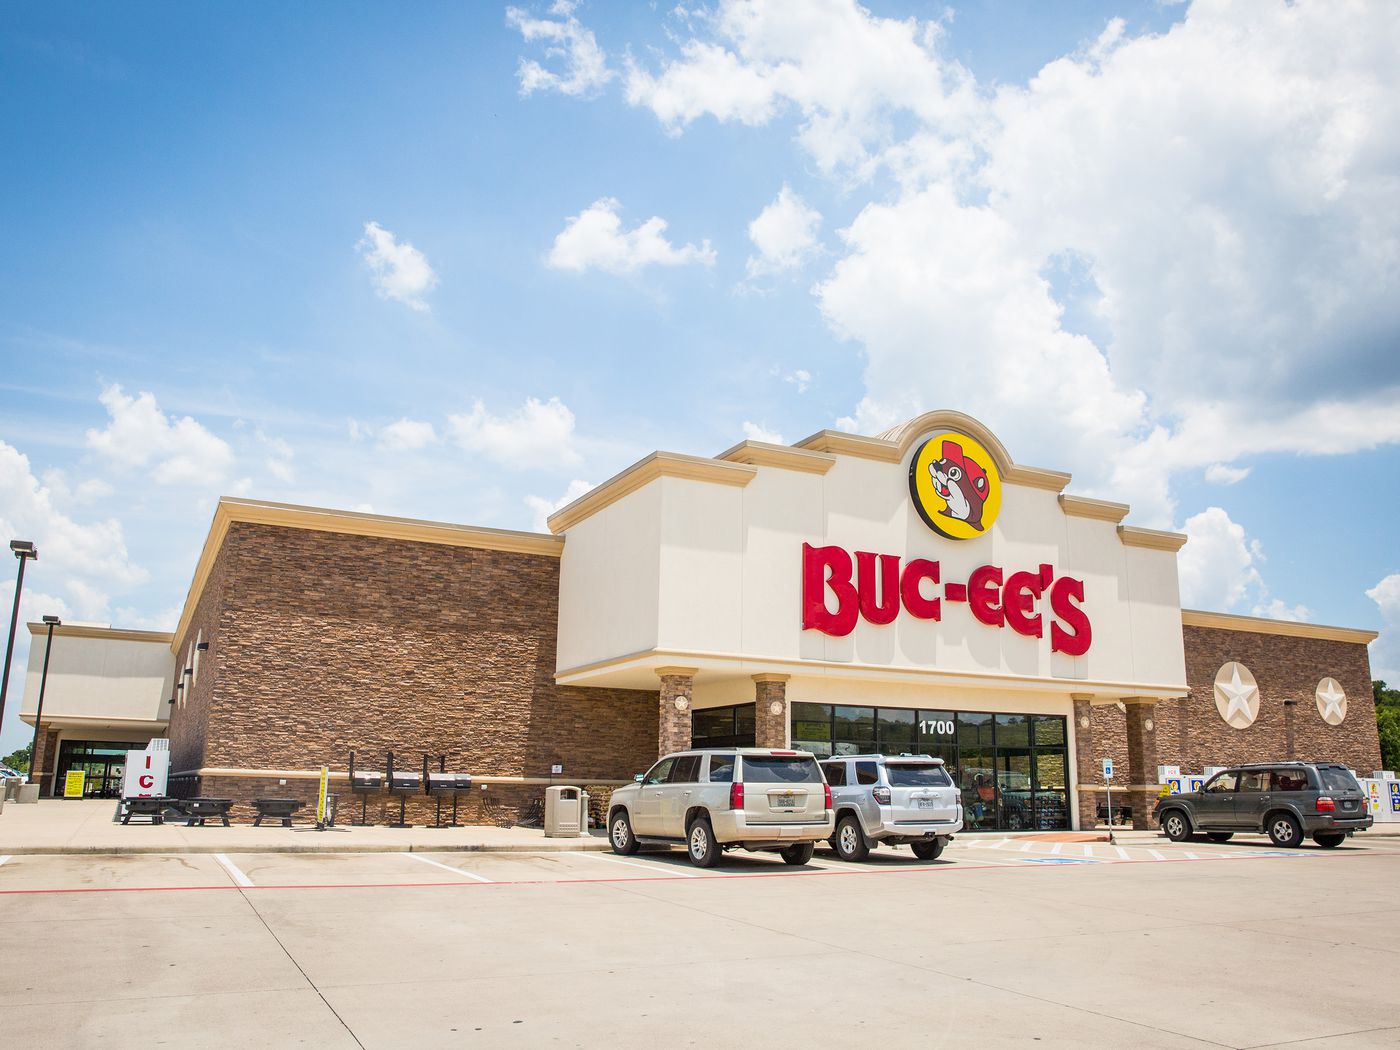 Tennessee Buc-ee’s will be the world’s biggest convenience store, outperforming Texas staple